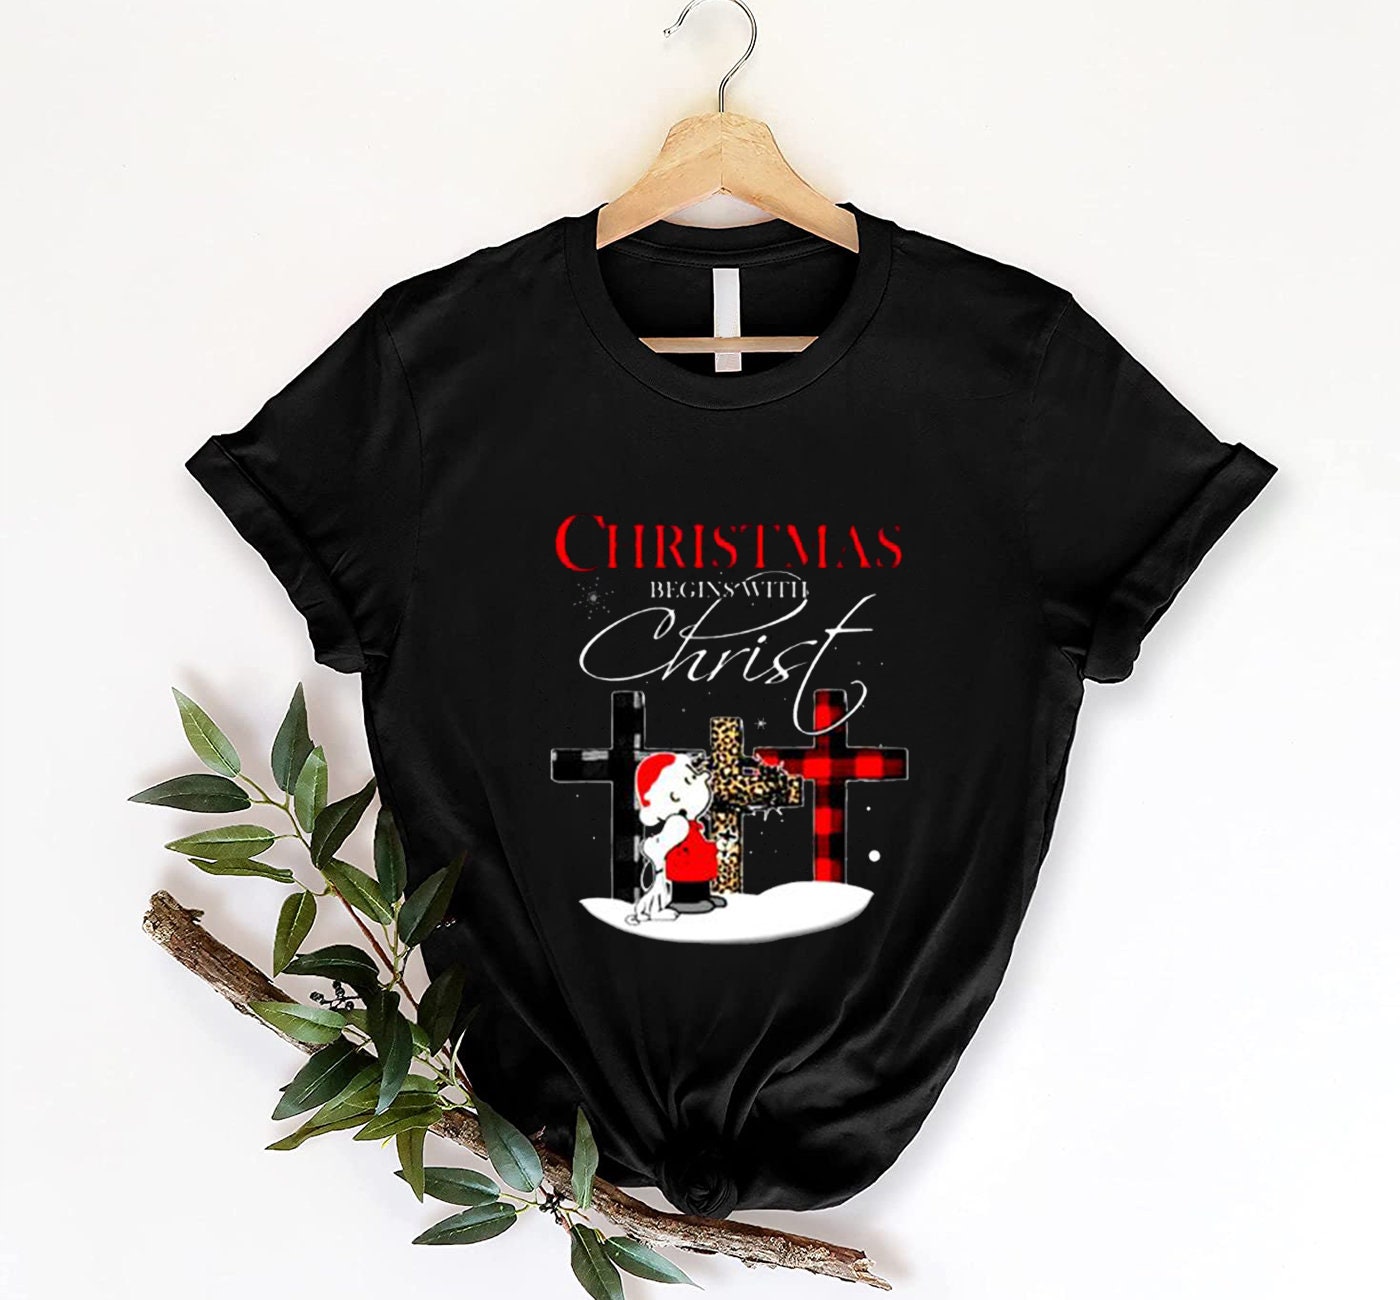 Discover Santa Charlie Brown And Snoopy Christmas Begins With Christ T-Shirt